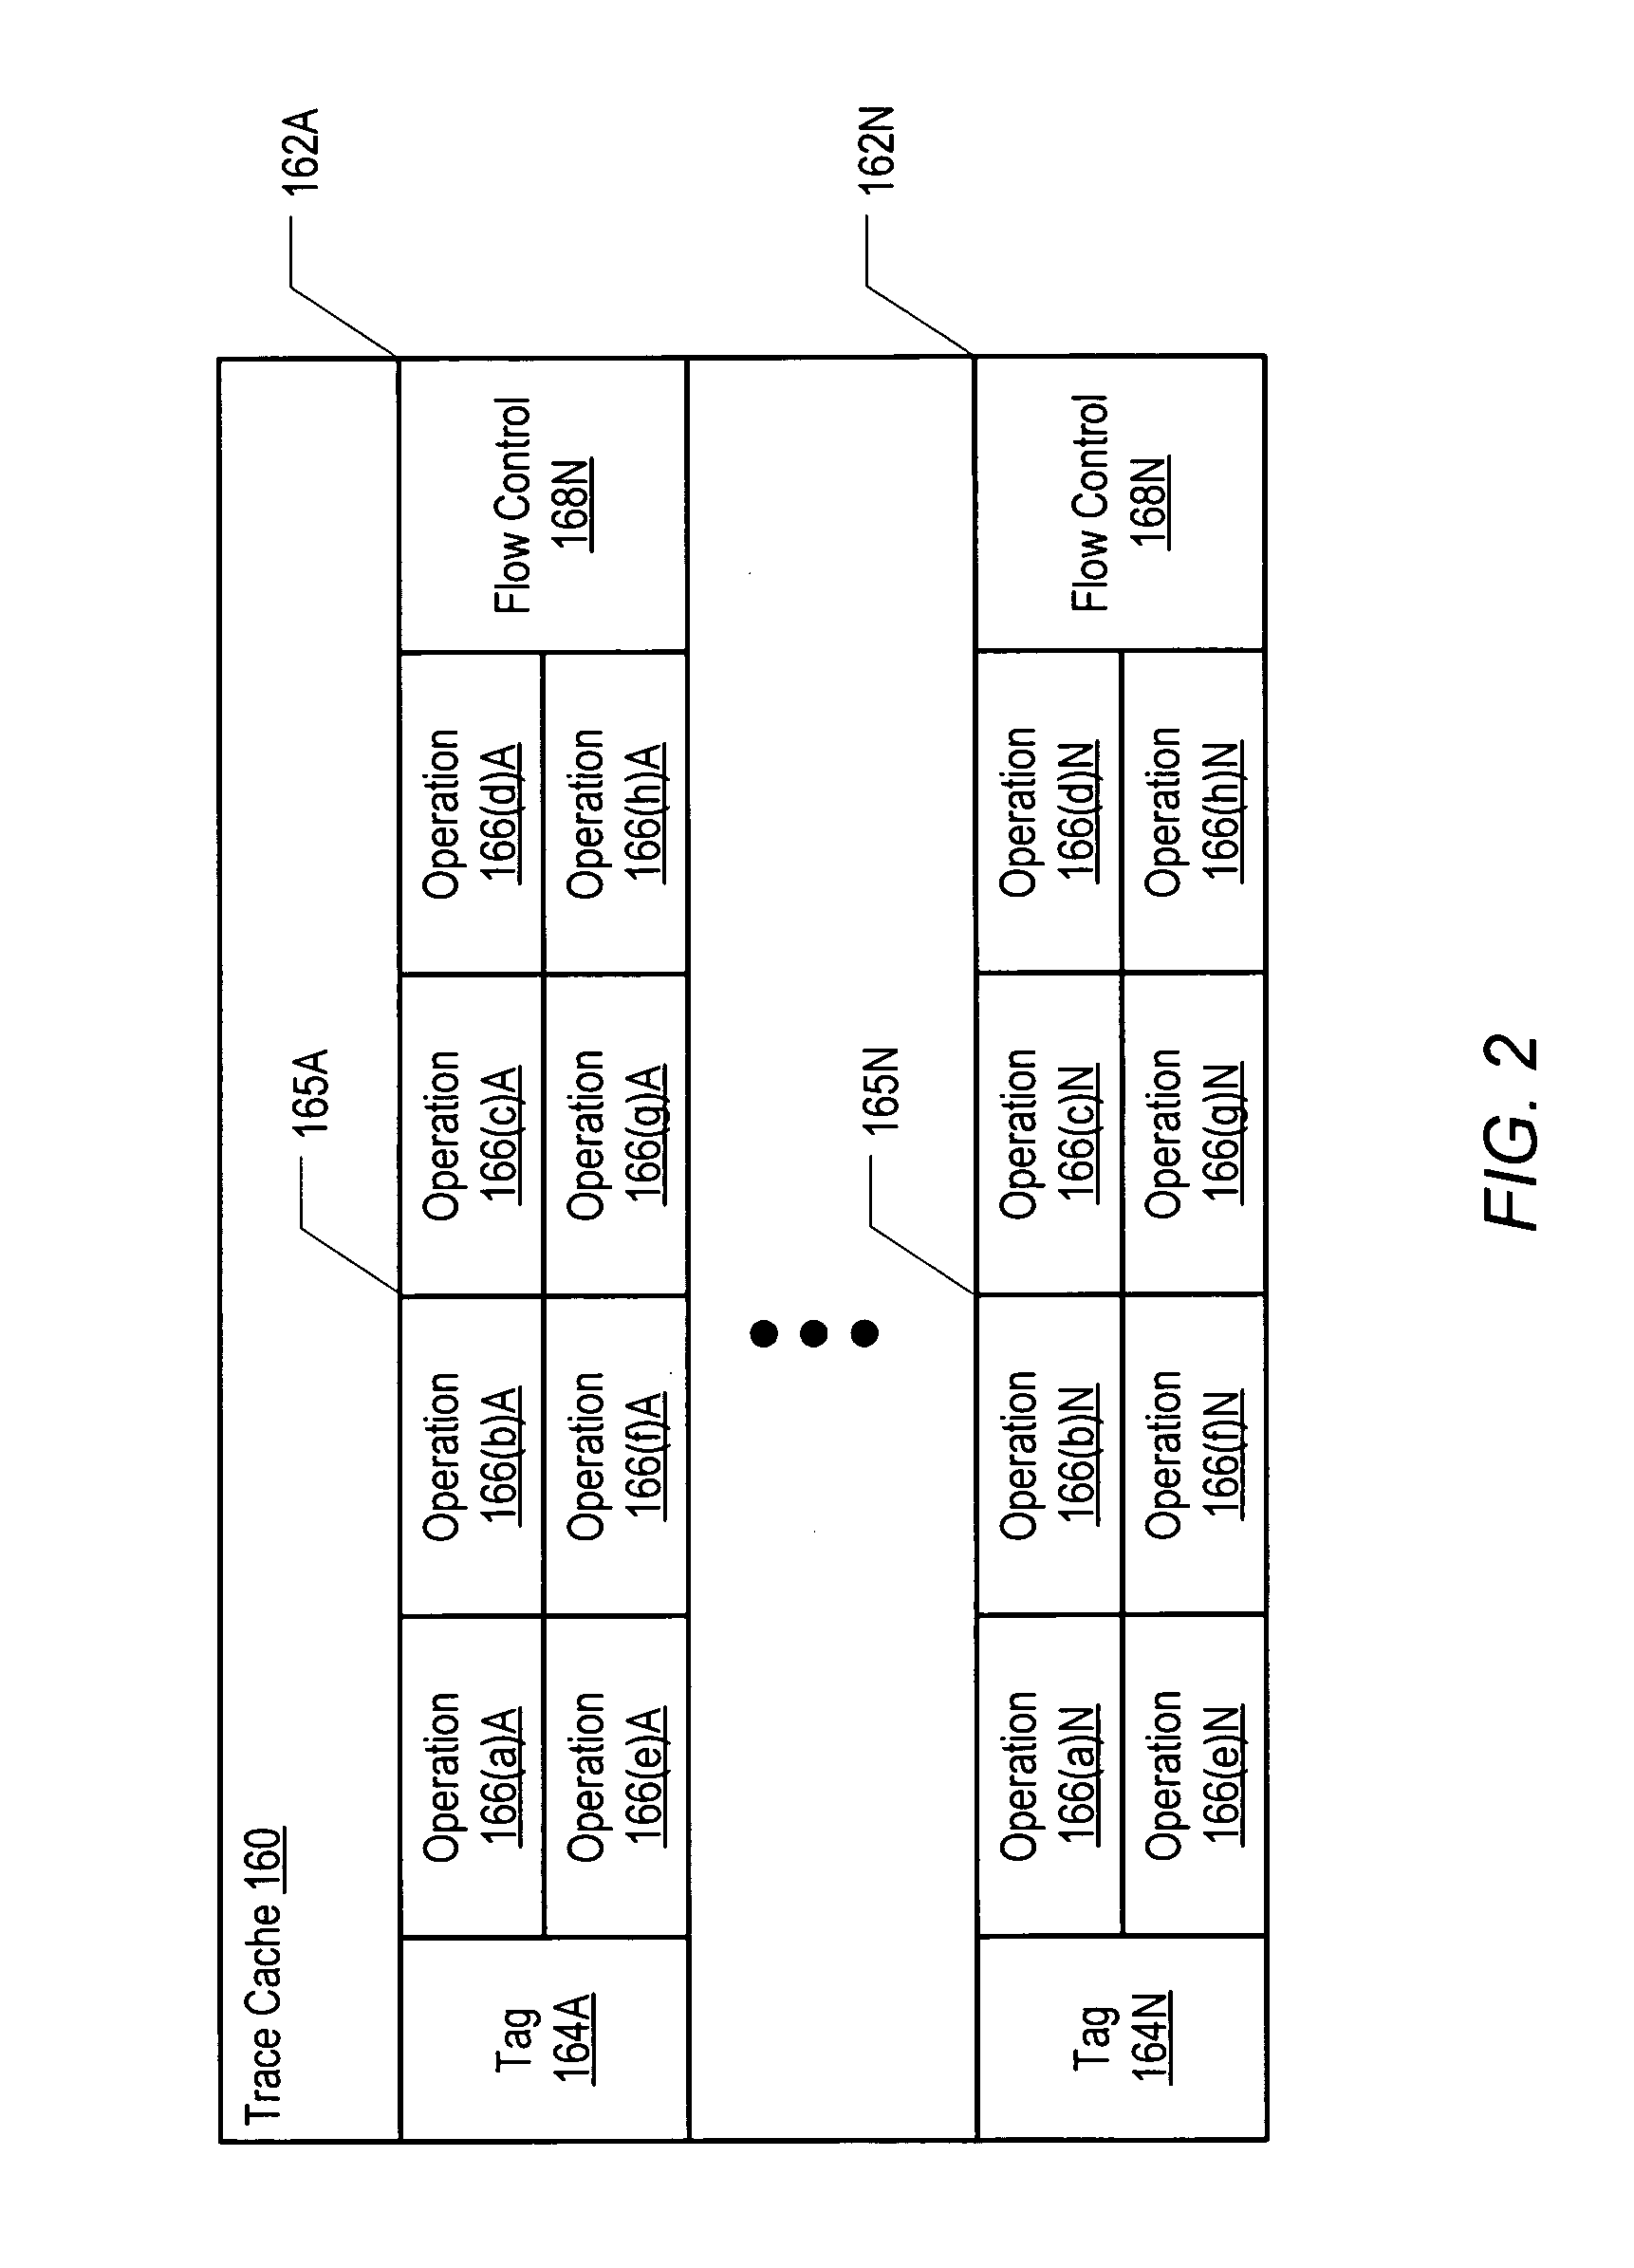 Method and processor including logic for storing traces within a trace cache